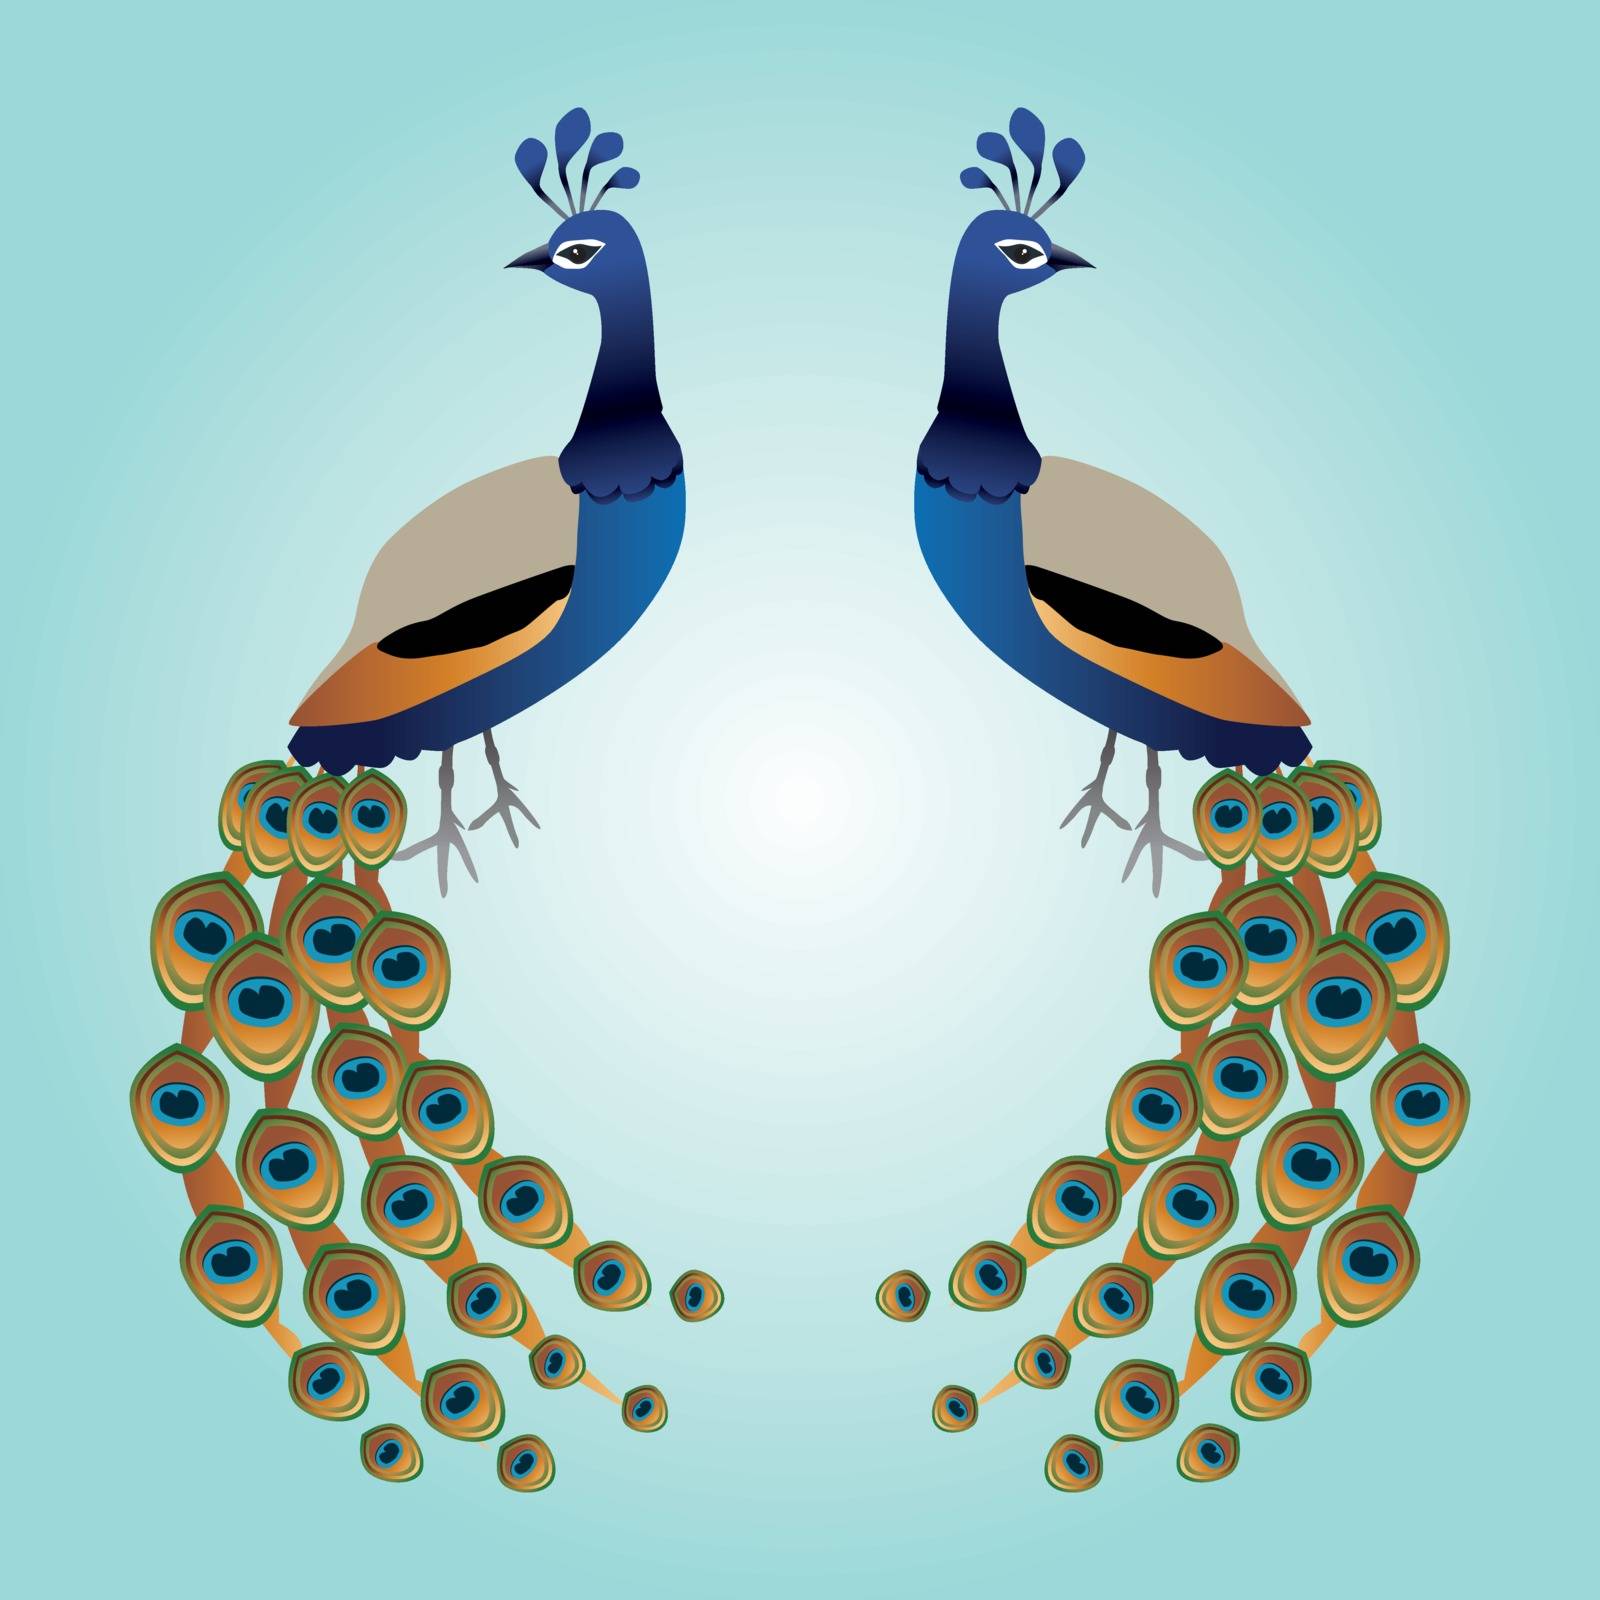 Two graceful male peacocks illustration